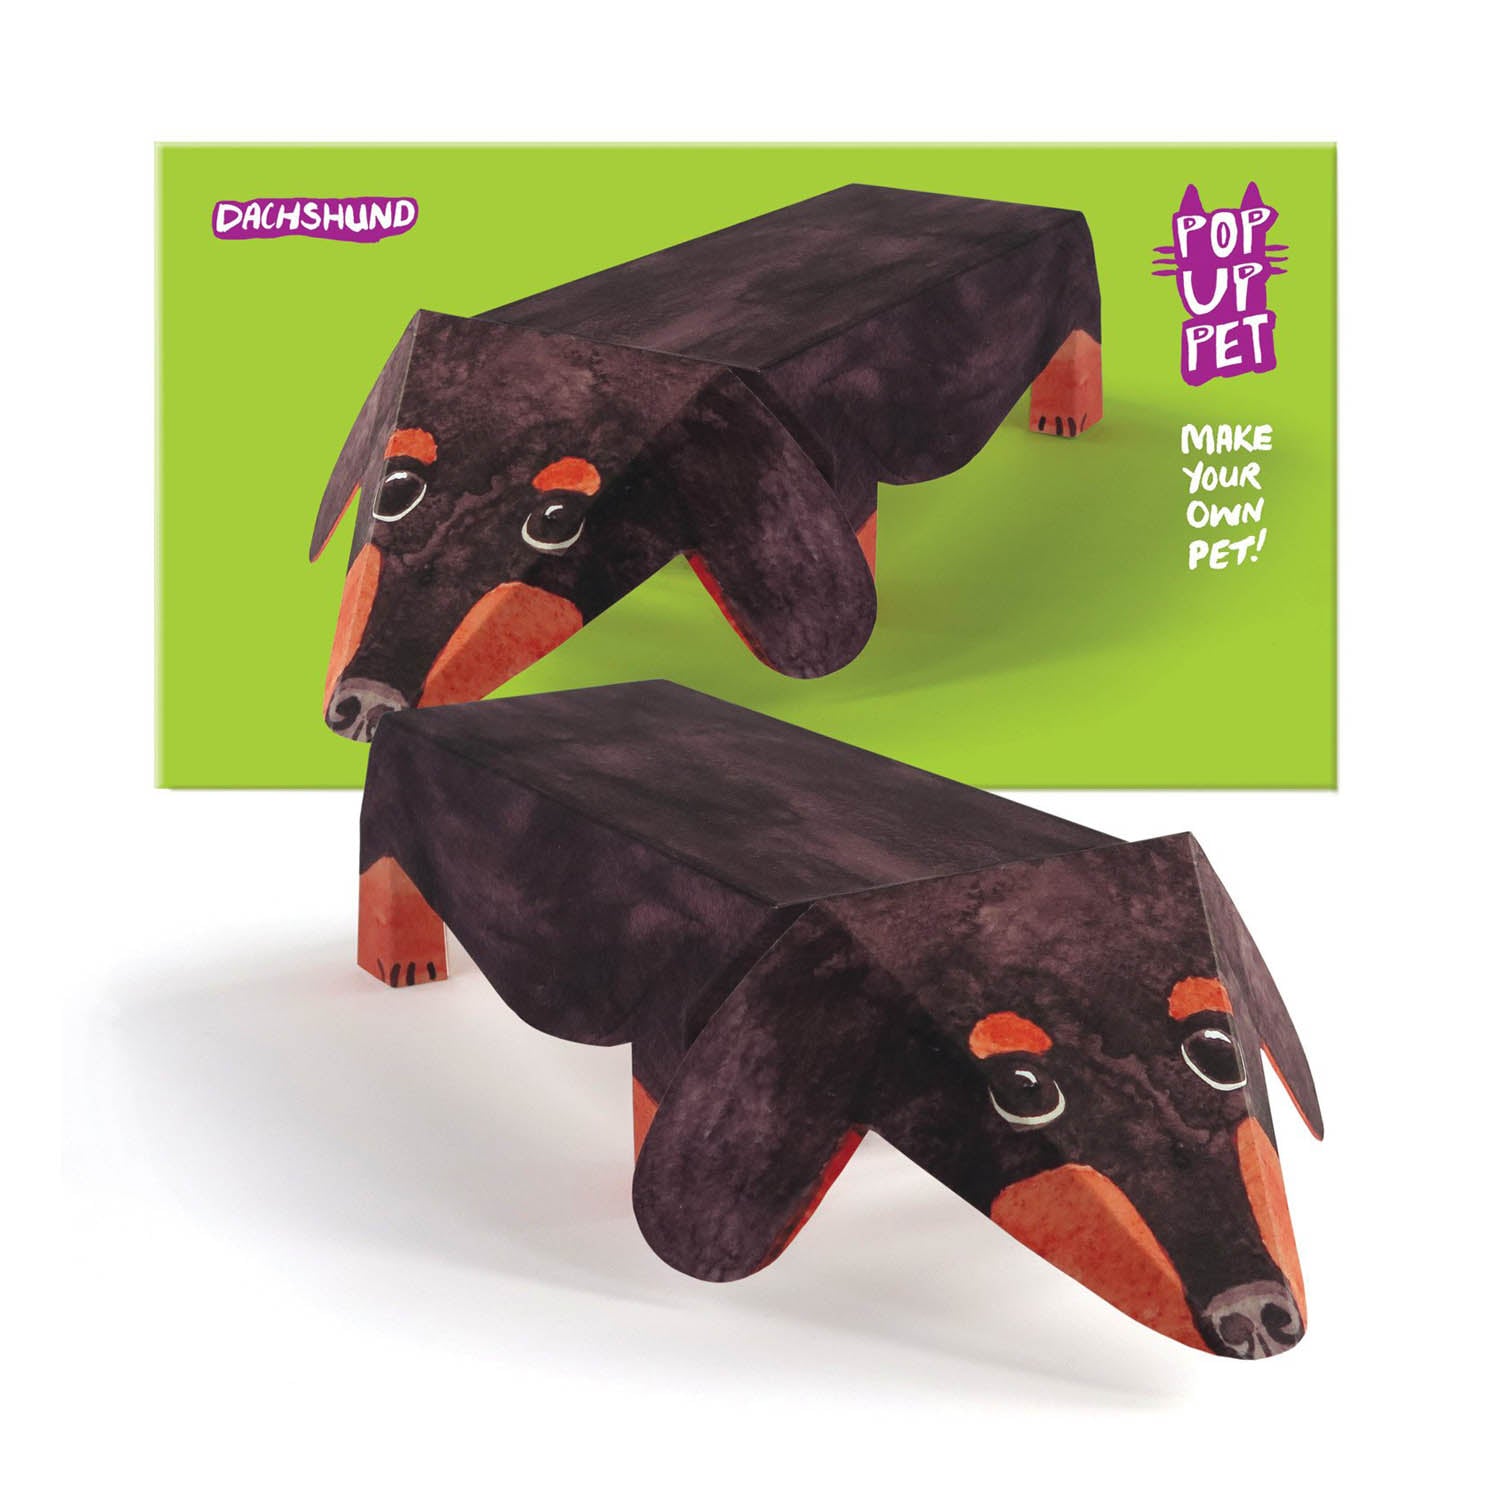 Dog Krazy Gifts - Dachshund Pop Up Pet, part of the range of Dachshund themed gifts available from DogKrazyGifts.co.uk